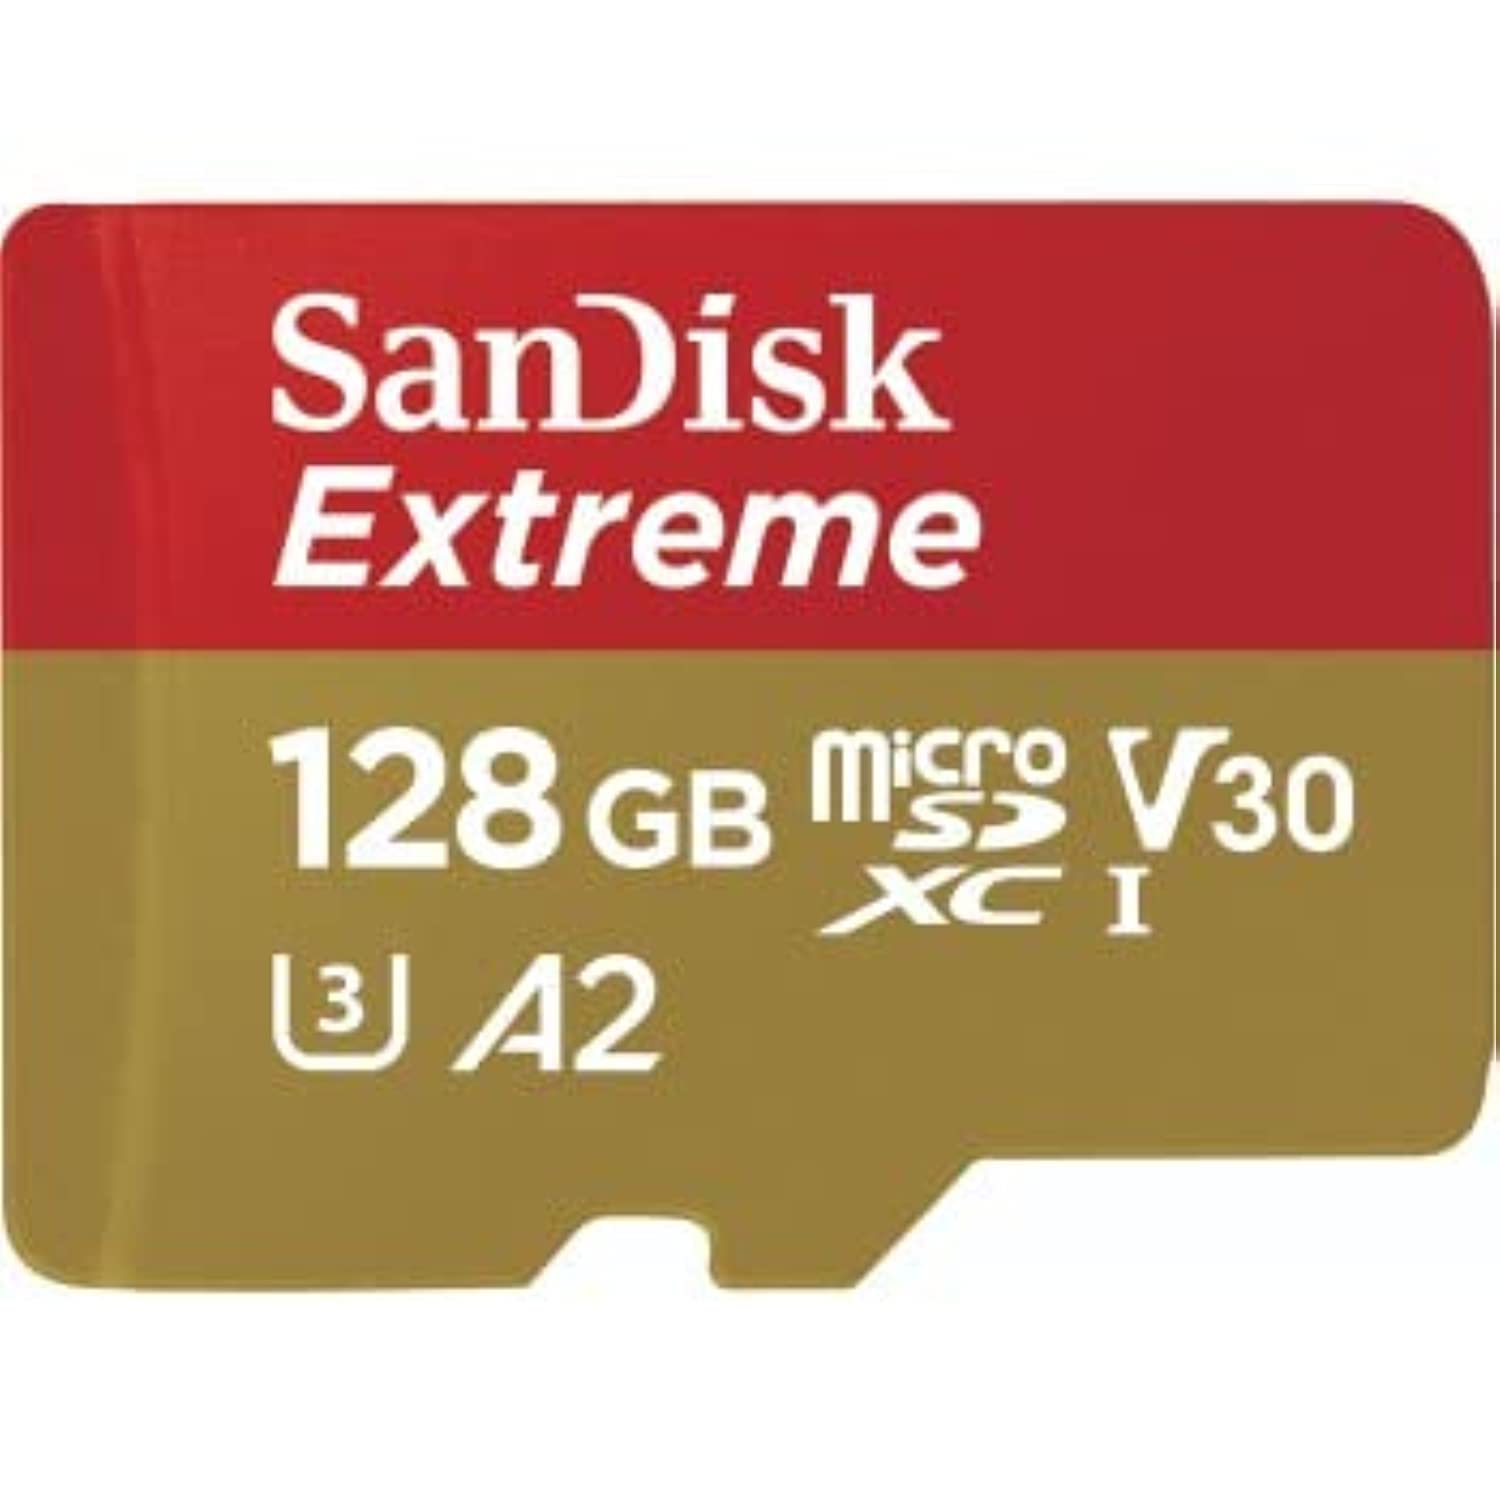 SanDisk Extreme 128GB UHS-I U3 microSDXC Memory Card with SD Adapter for Mobile Gaming並行輸入品